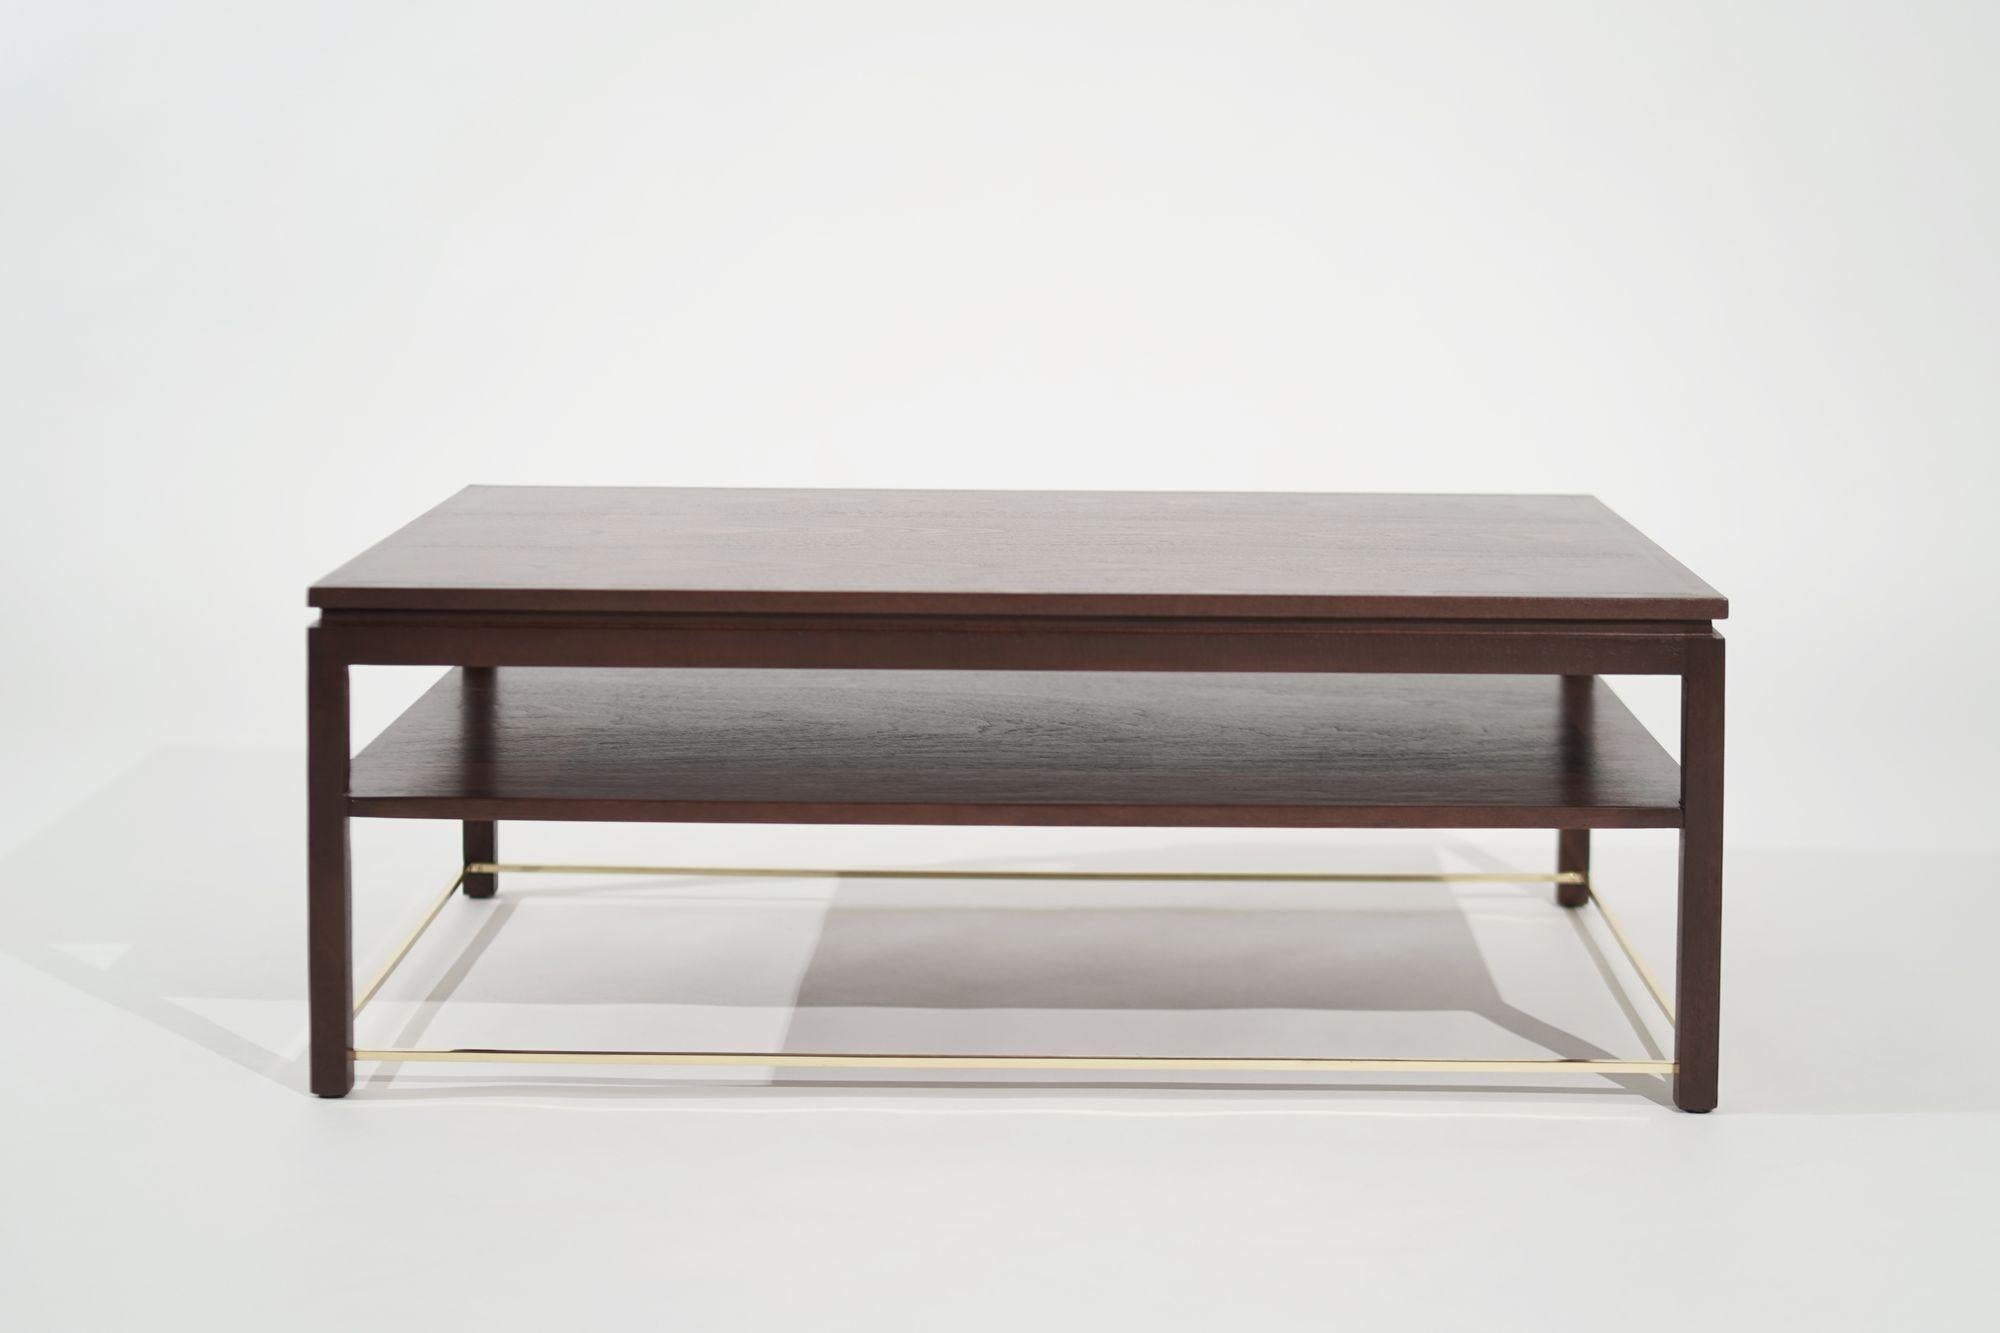 Stunning mahogany coffee table designed by the renowned Edward Wormley for Dunbar in the 1950s, now fully restored by the experts at Stamford Modern. This exquisite piece of furniture is the epitome of mid-century modern design, with its sleek lines